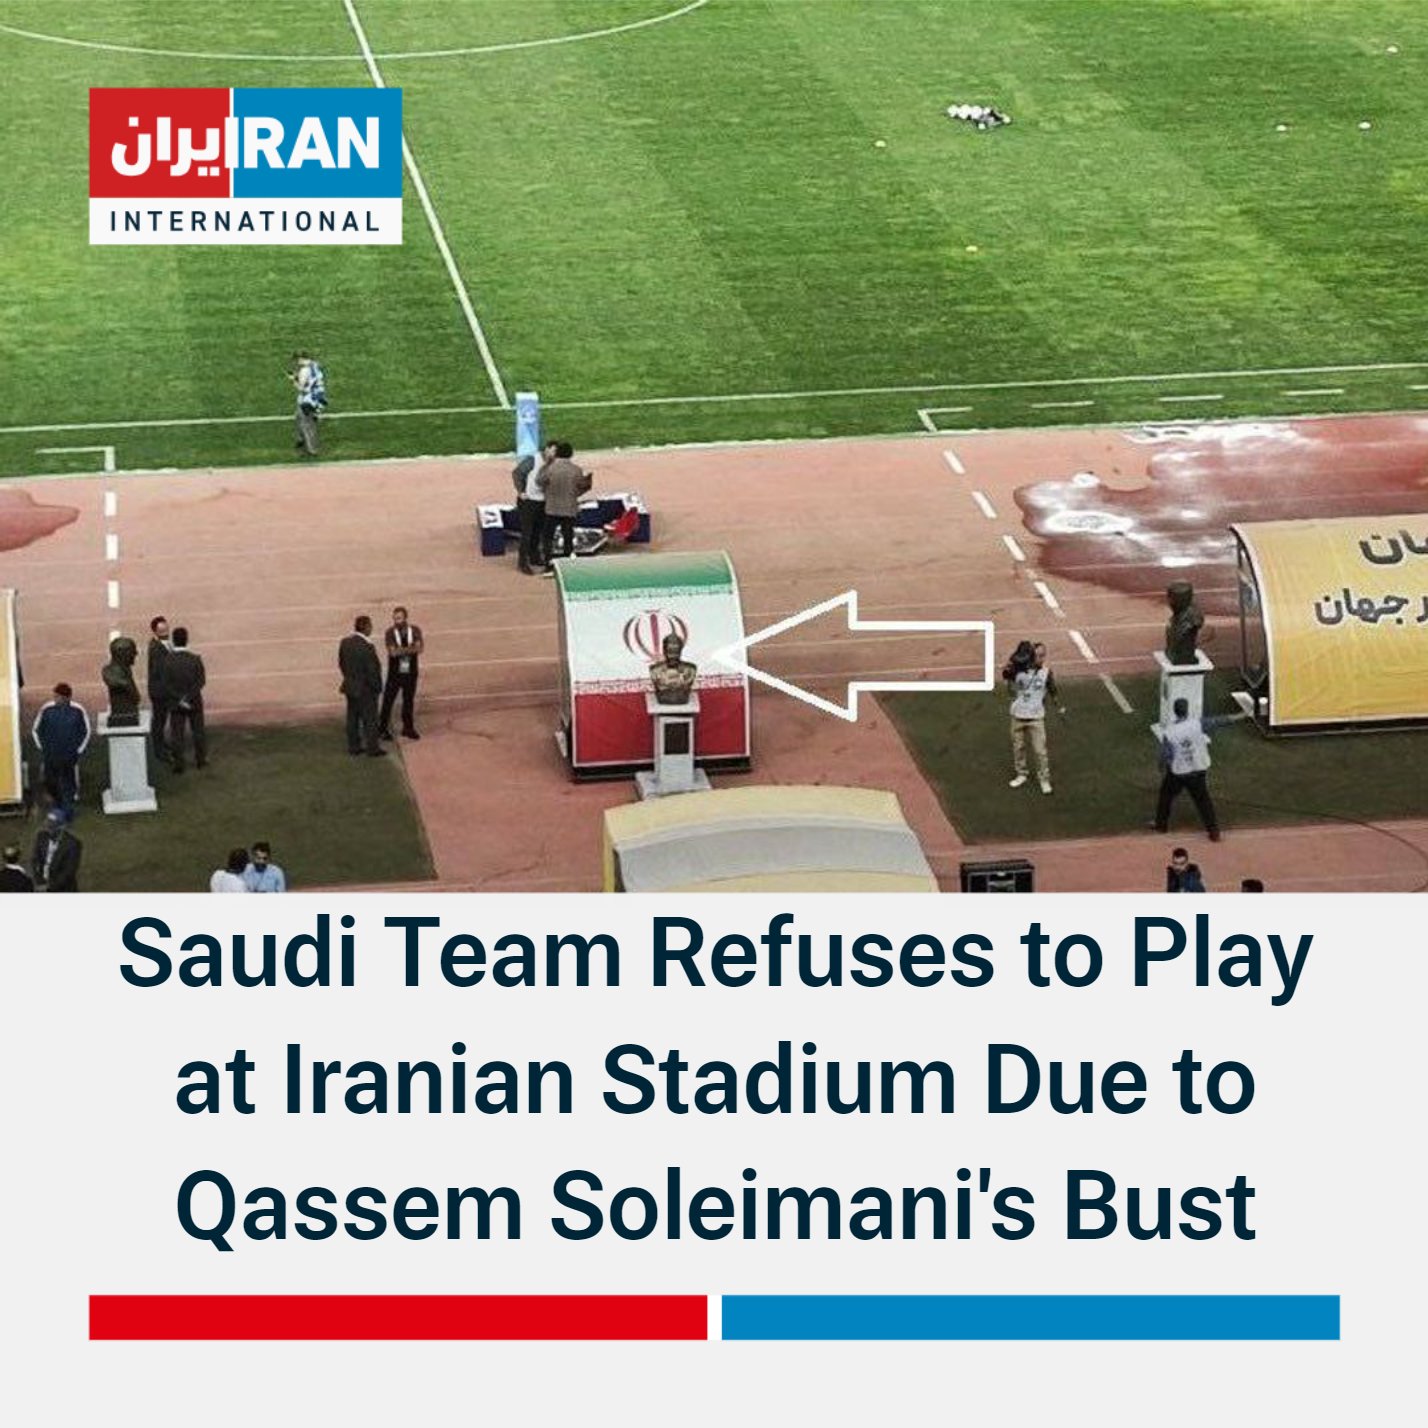 Sepahan: Iranian soccer club punished and fined $200,000 for displaying  slain's commander bust that forced cancelation of match against Saudi team